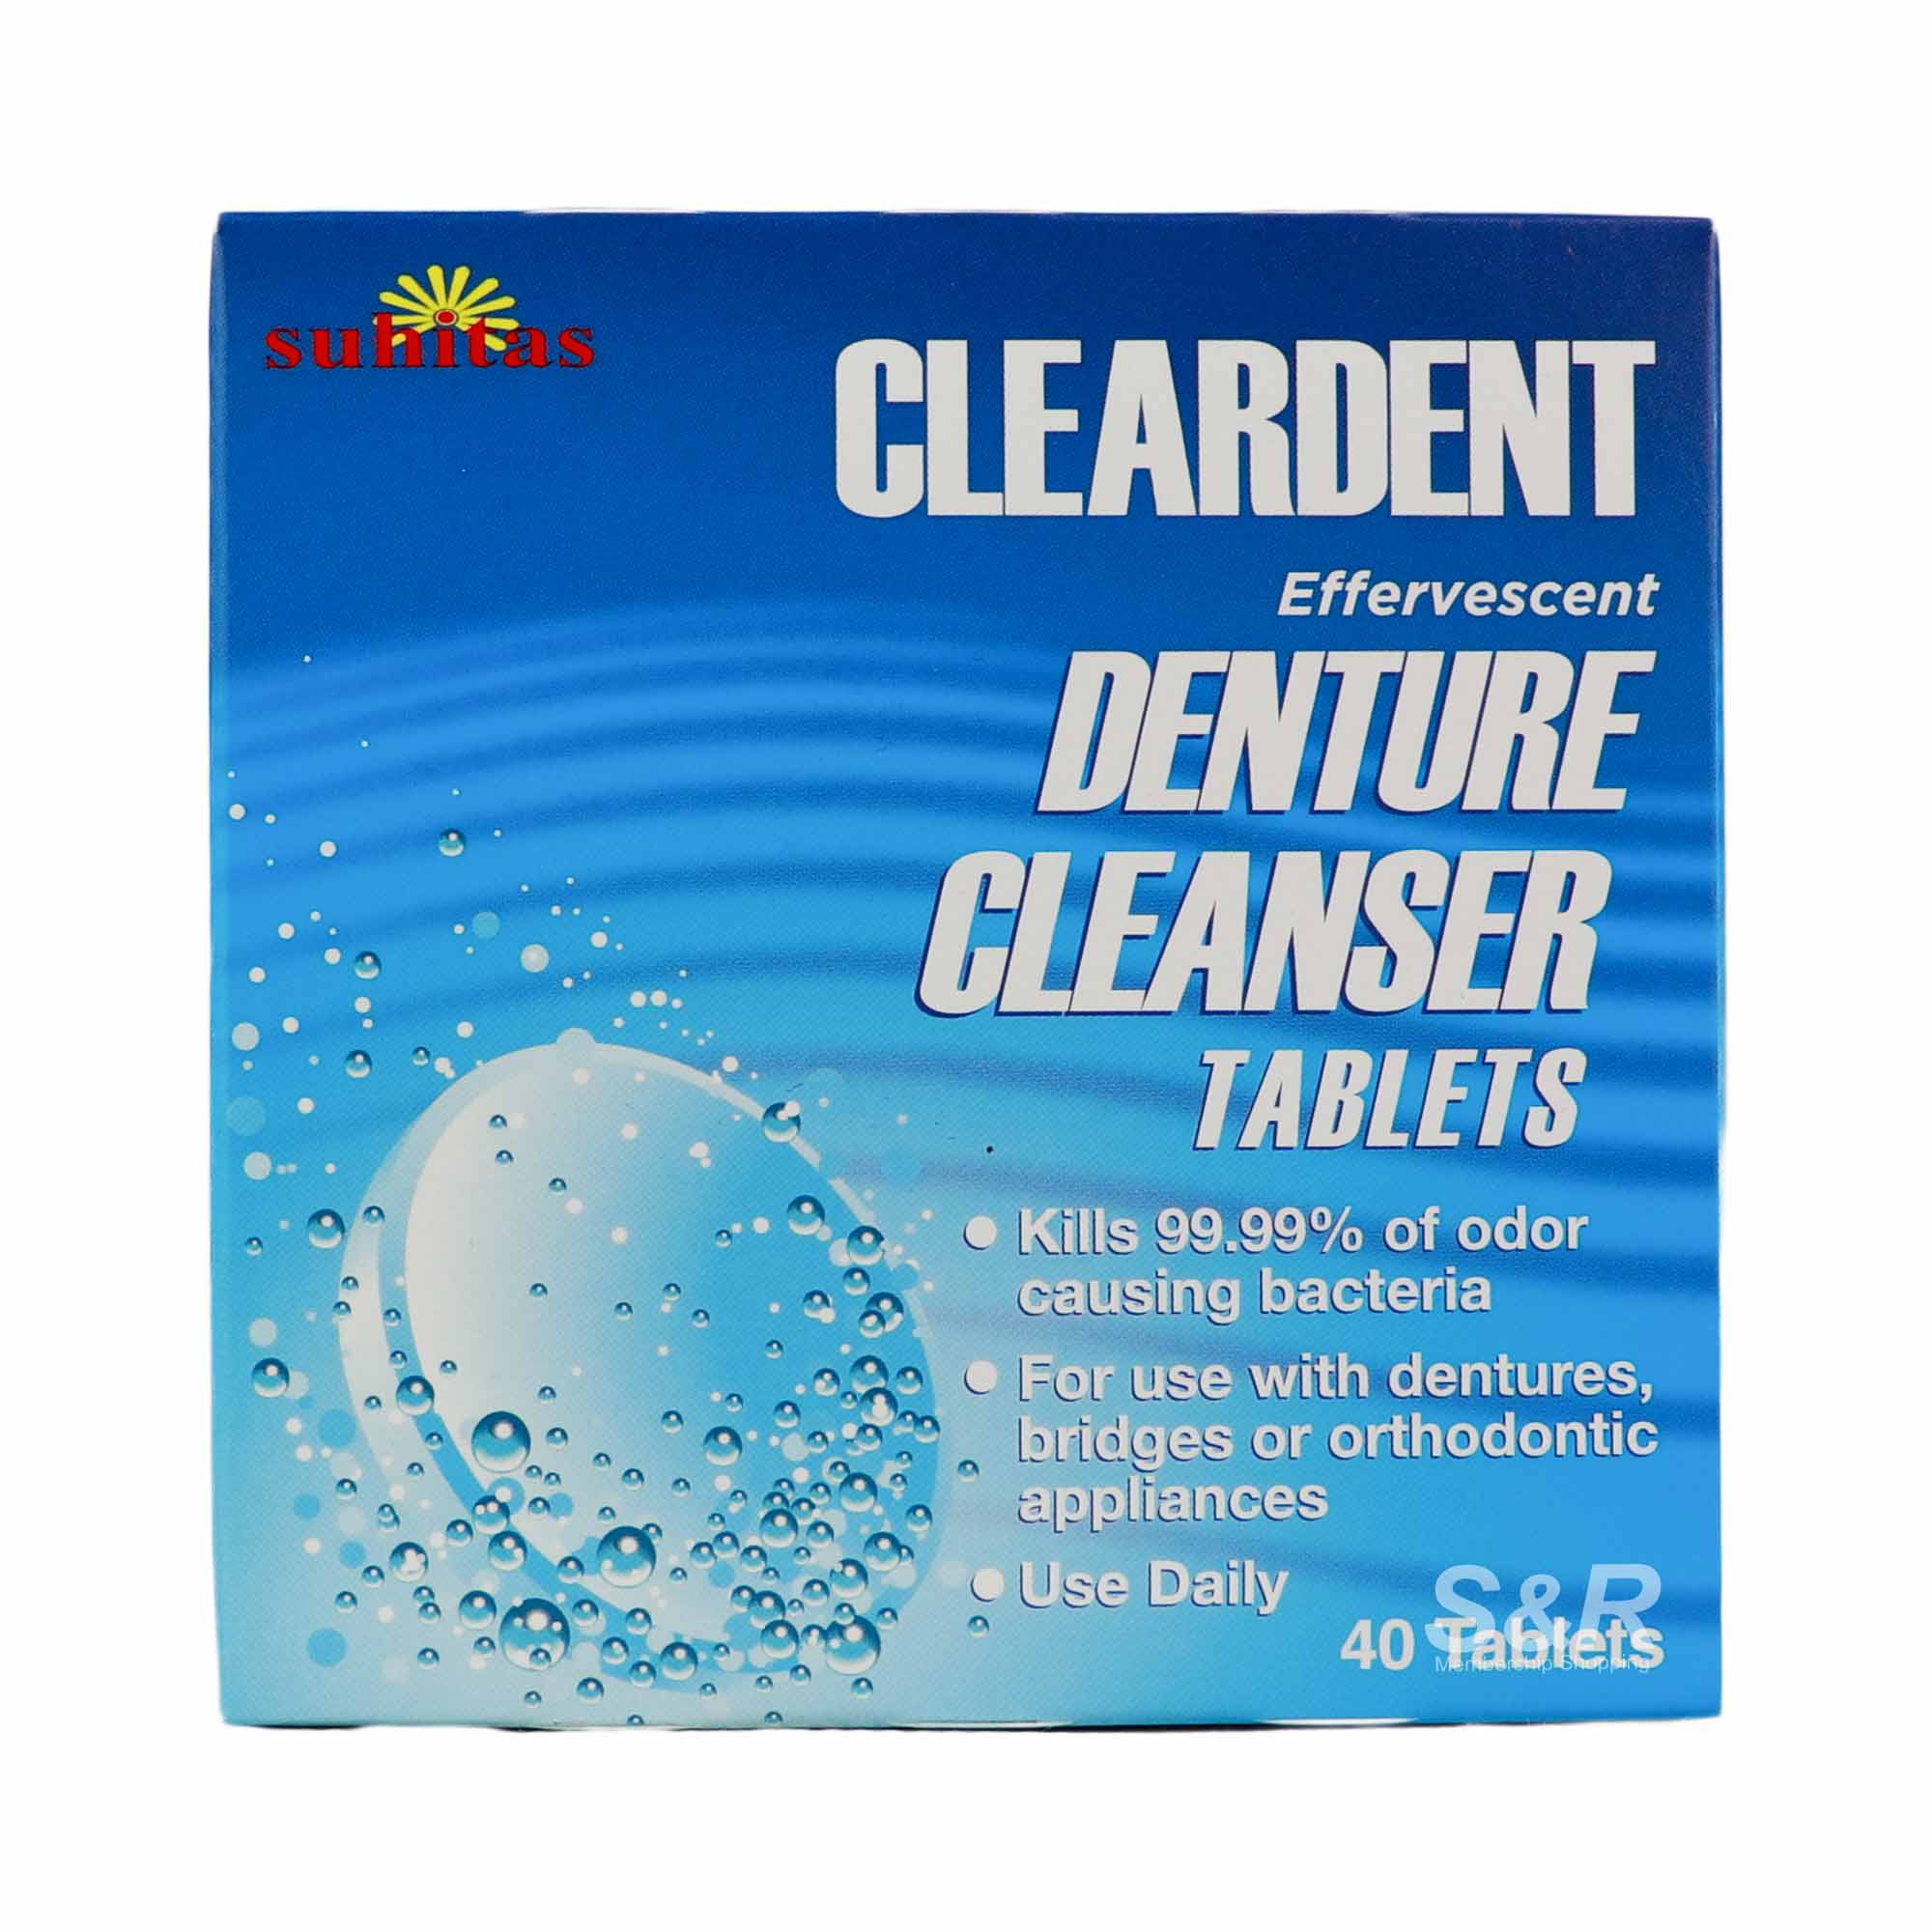 Cleardent Effervescent Denture Cleanser 40 tablets